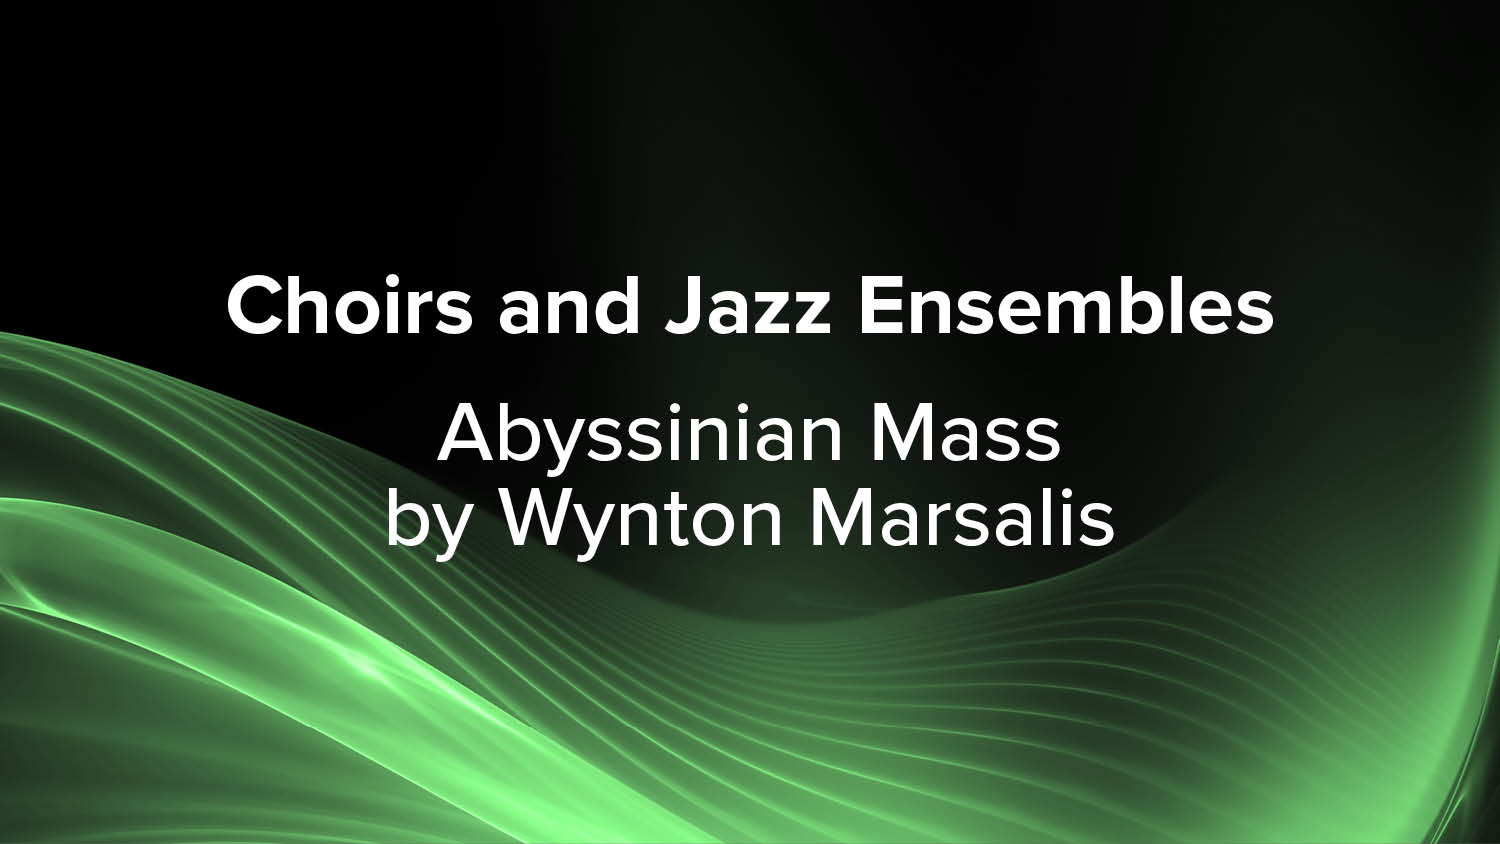 Choirs and Jazz Ensembles Abyssinian Mass  by Wynton Marsalis